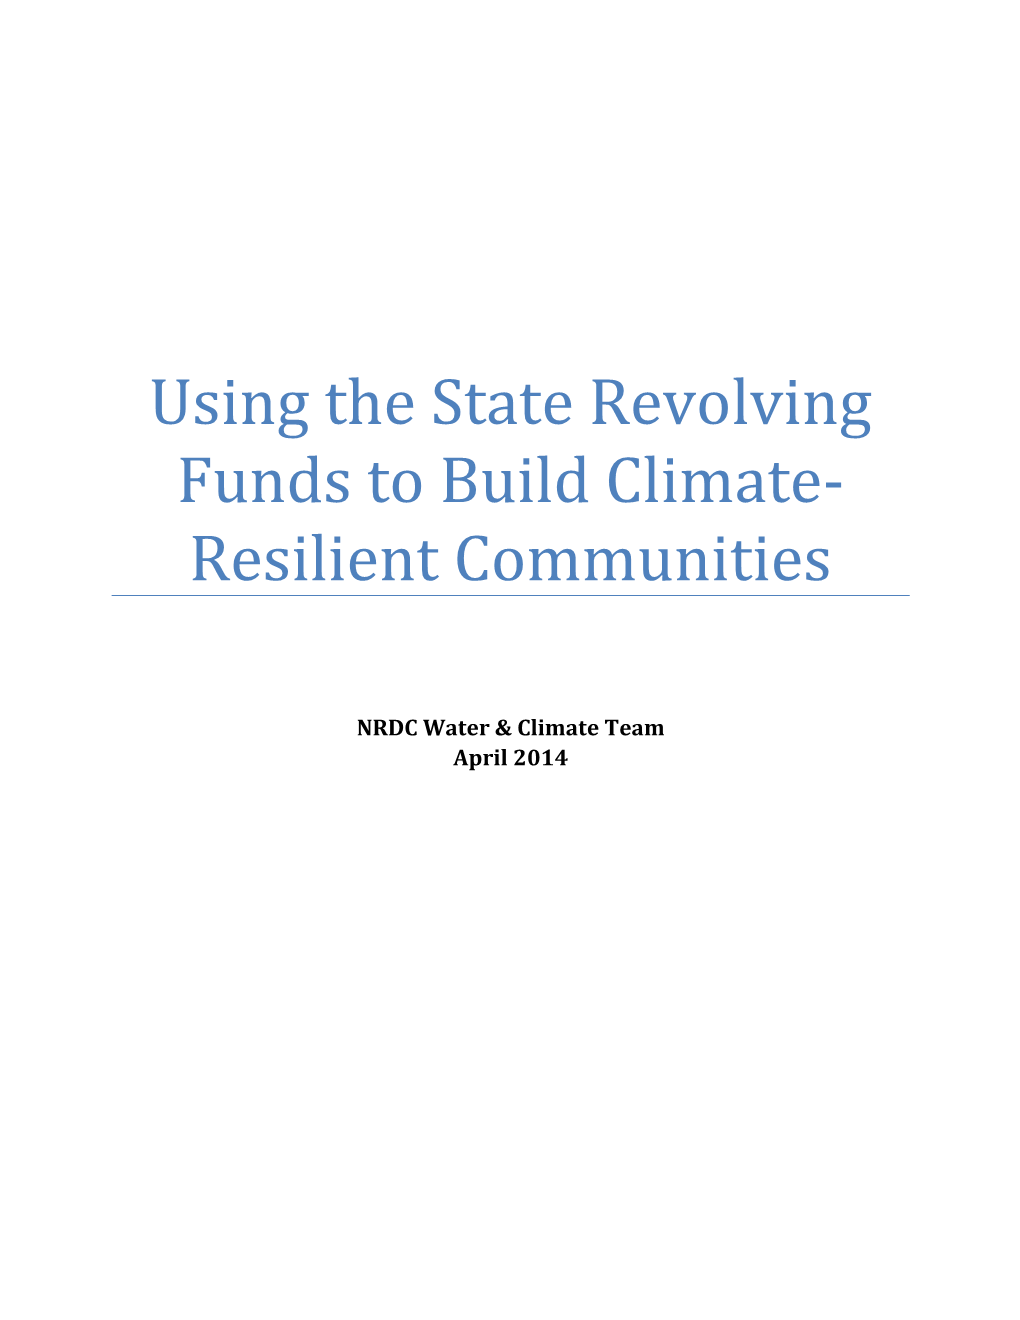 Using the State Revolving Funds to Build Climate-Resilient Communities